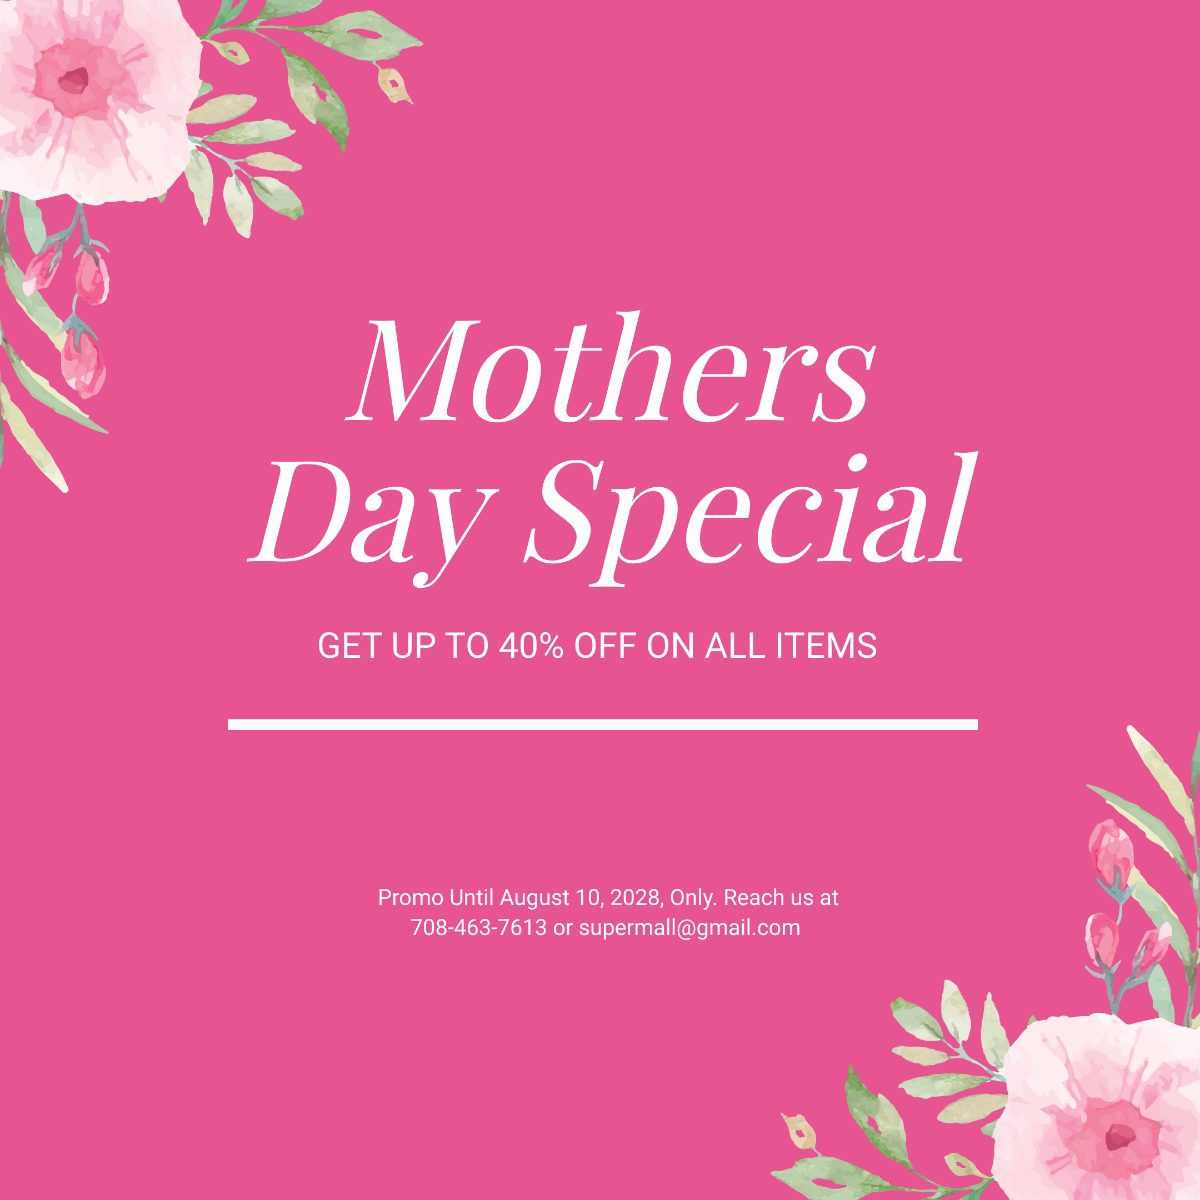 Mothers Day Special Sale Instagram Post Template